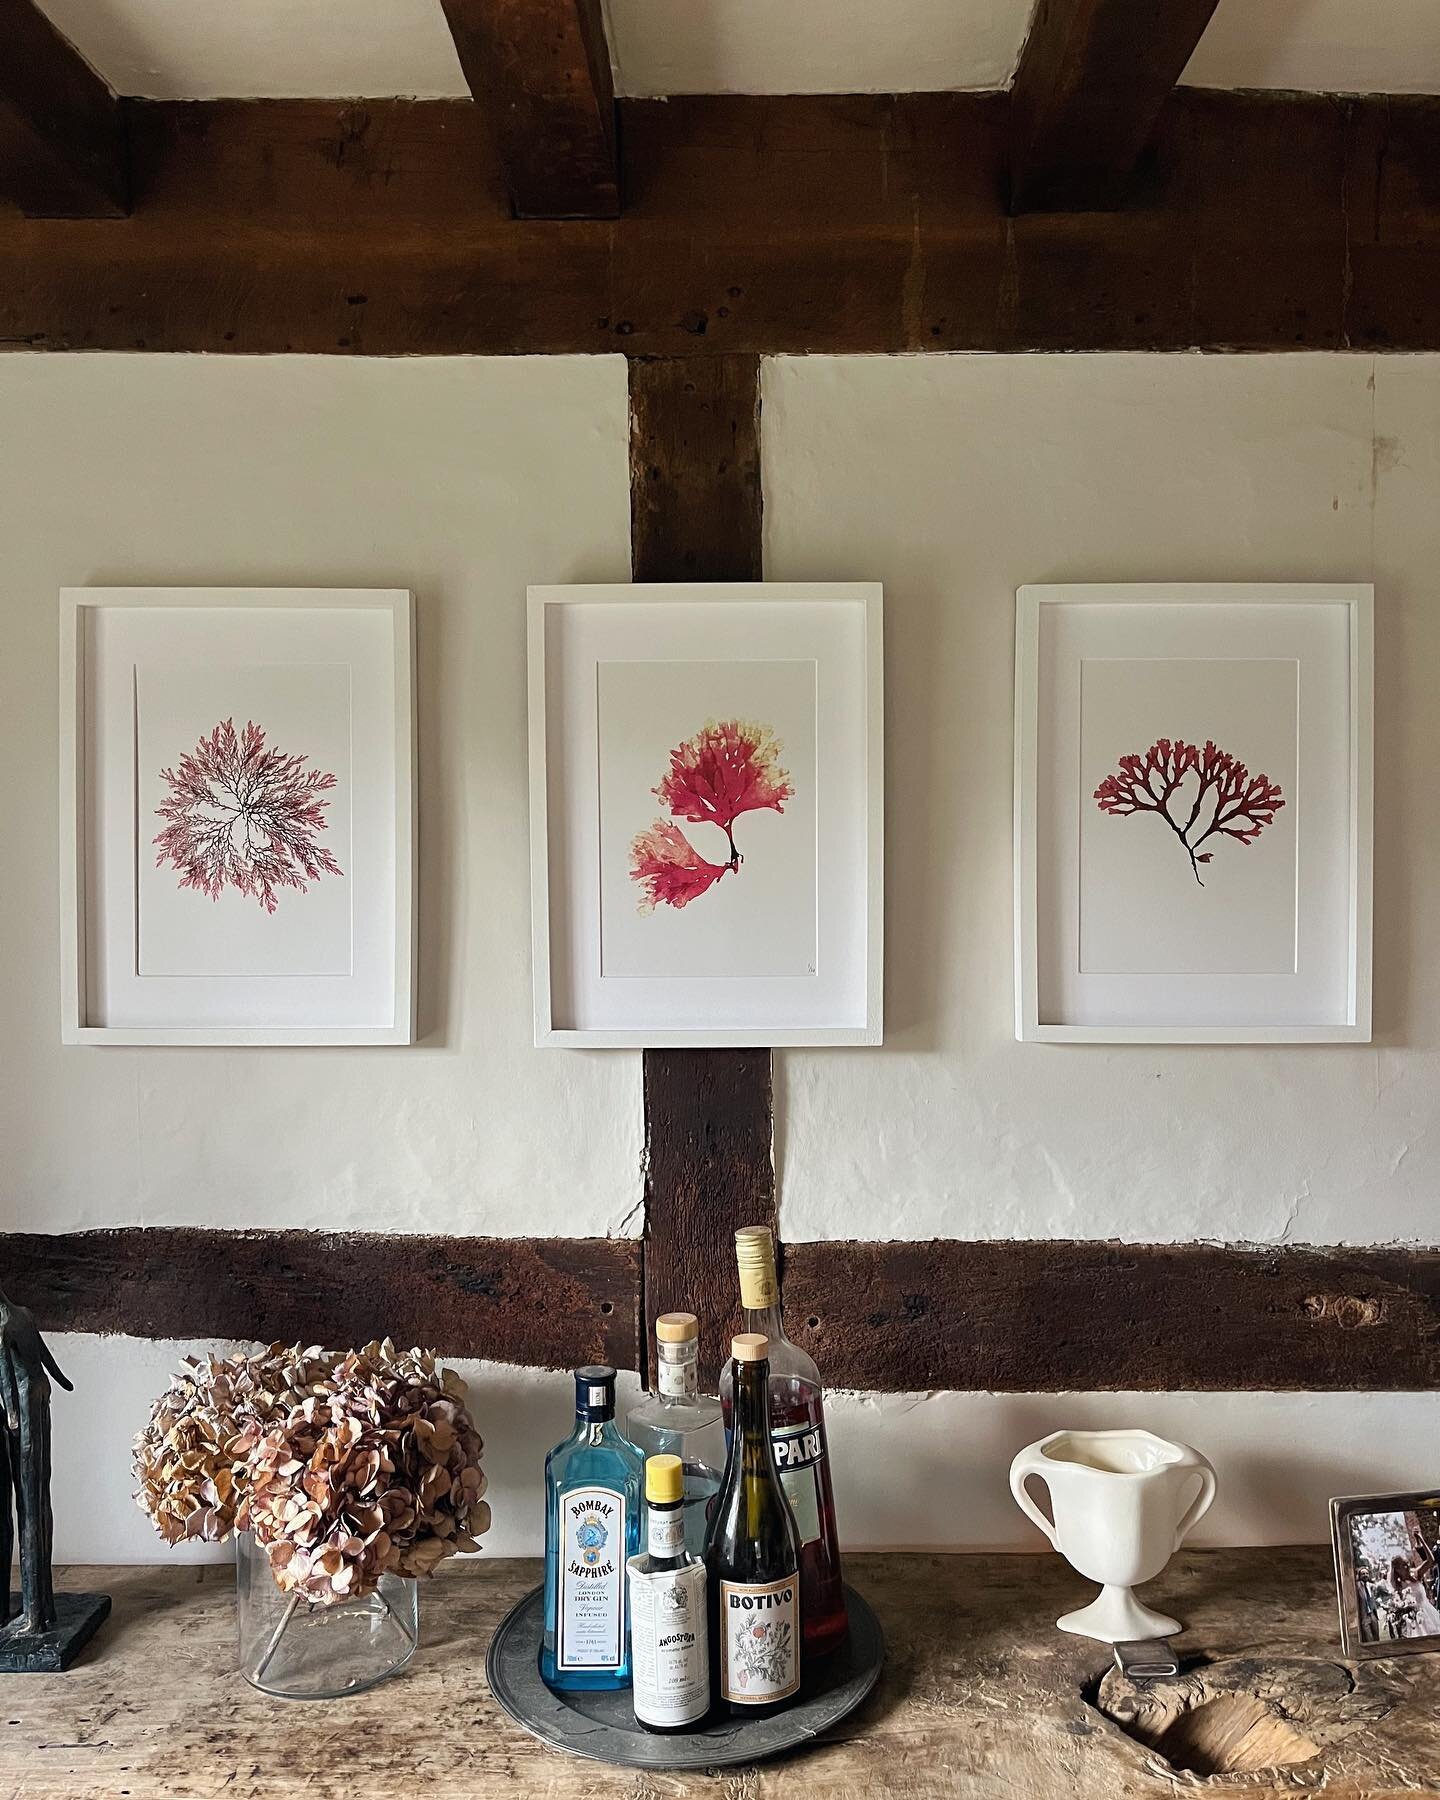 Now online. Limited edition prints of some of our favourite previous pressings. So pleased with how these have come out ❣️
&bull;
&bull;
&bull;
&bull;
#tamra #tamrauk #seaweed #pressedseaweed #seaweedpressing #britishseaweed #foraging #foragedart #ne